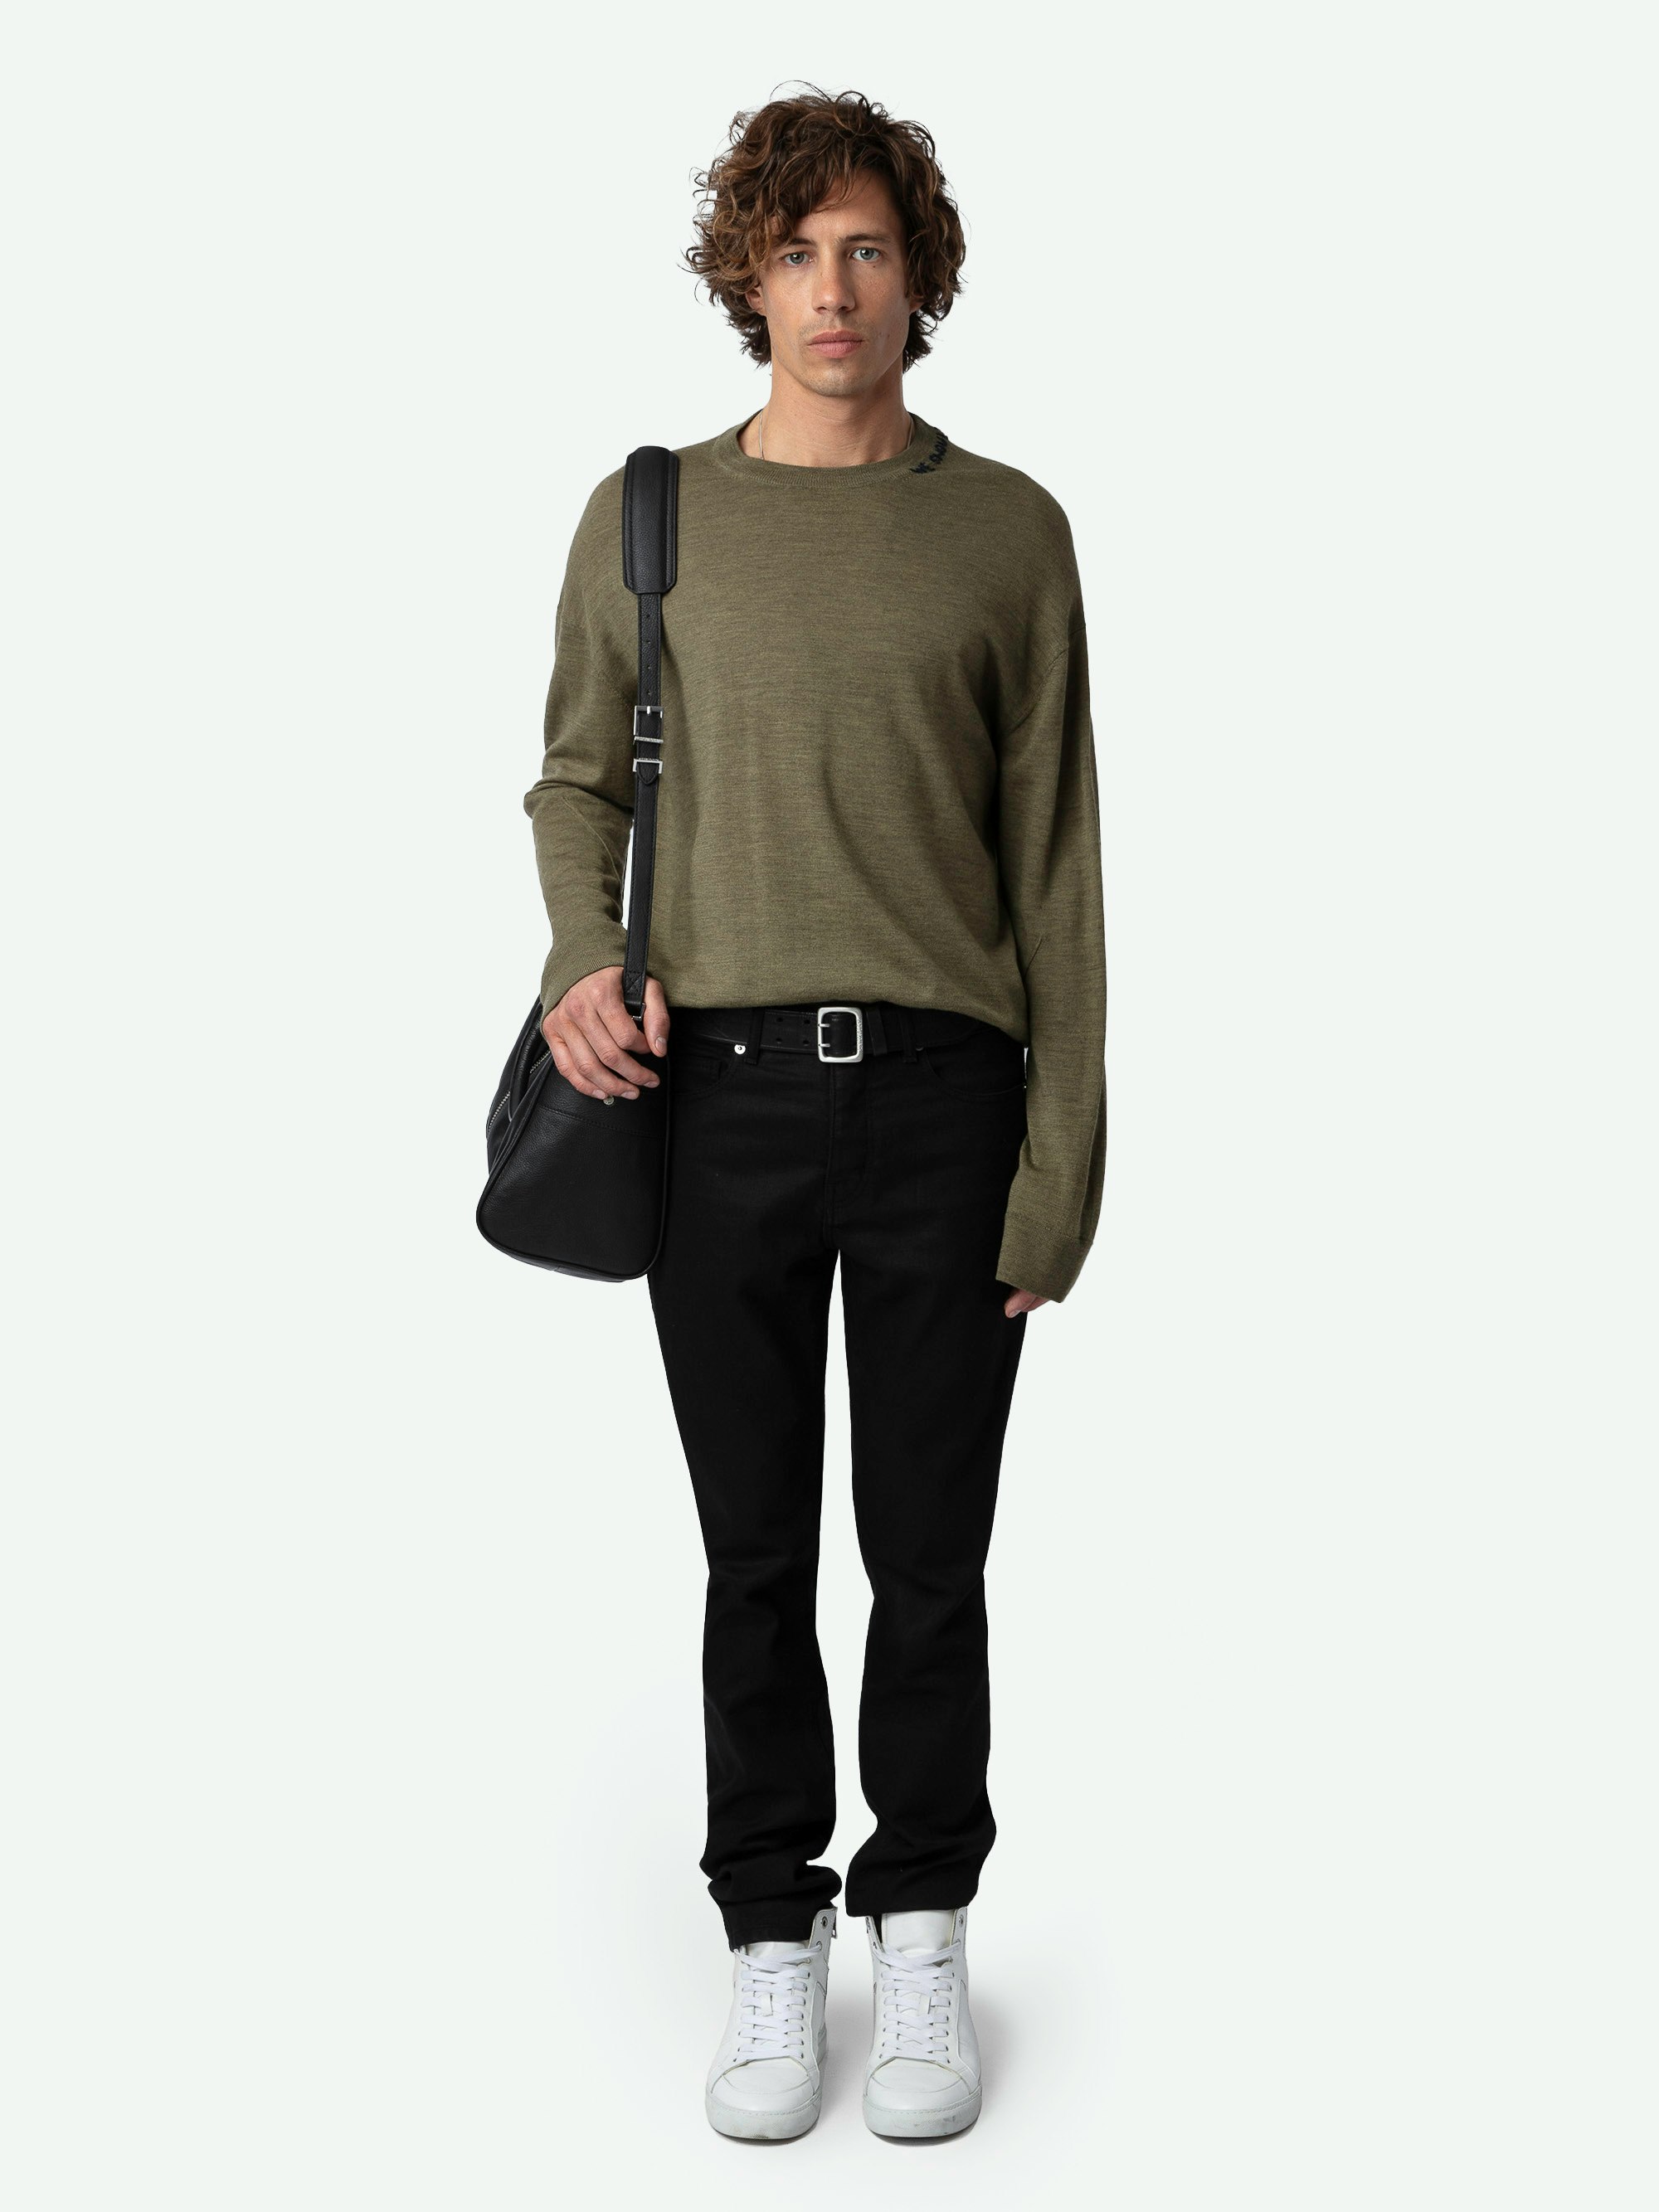 Marko Jumper - Long-sleeved loose-fitting khaki merino wool jumper with ‘We Should Kiss’ embroidery on the collar.